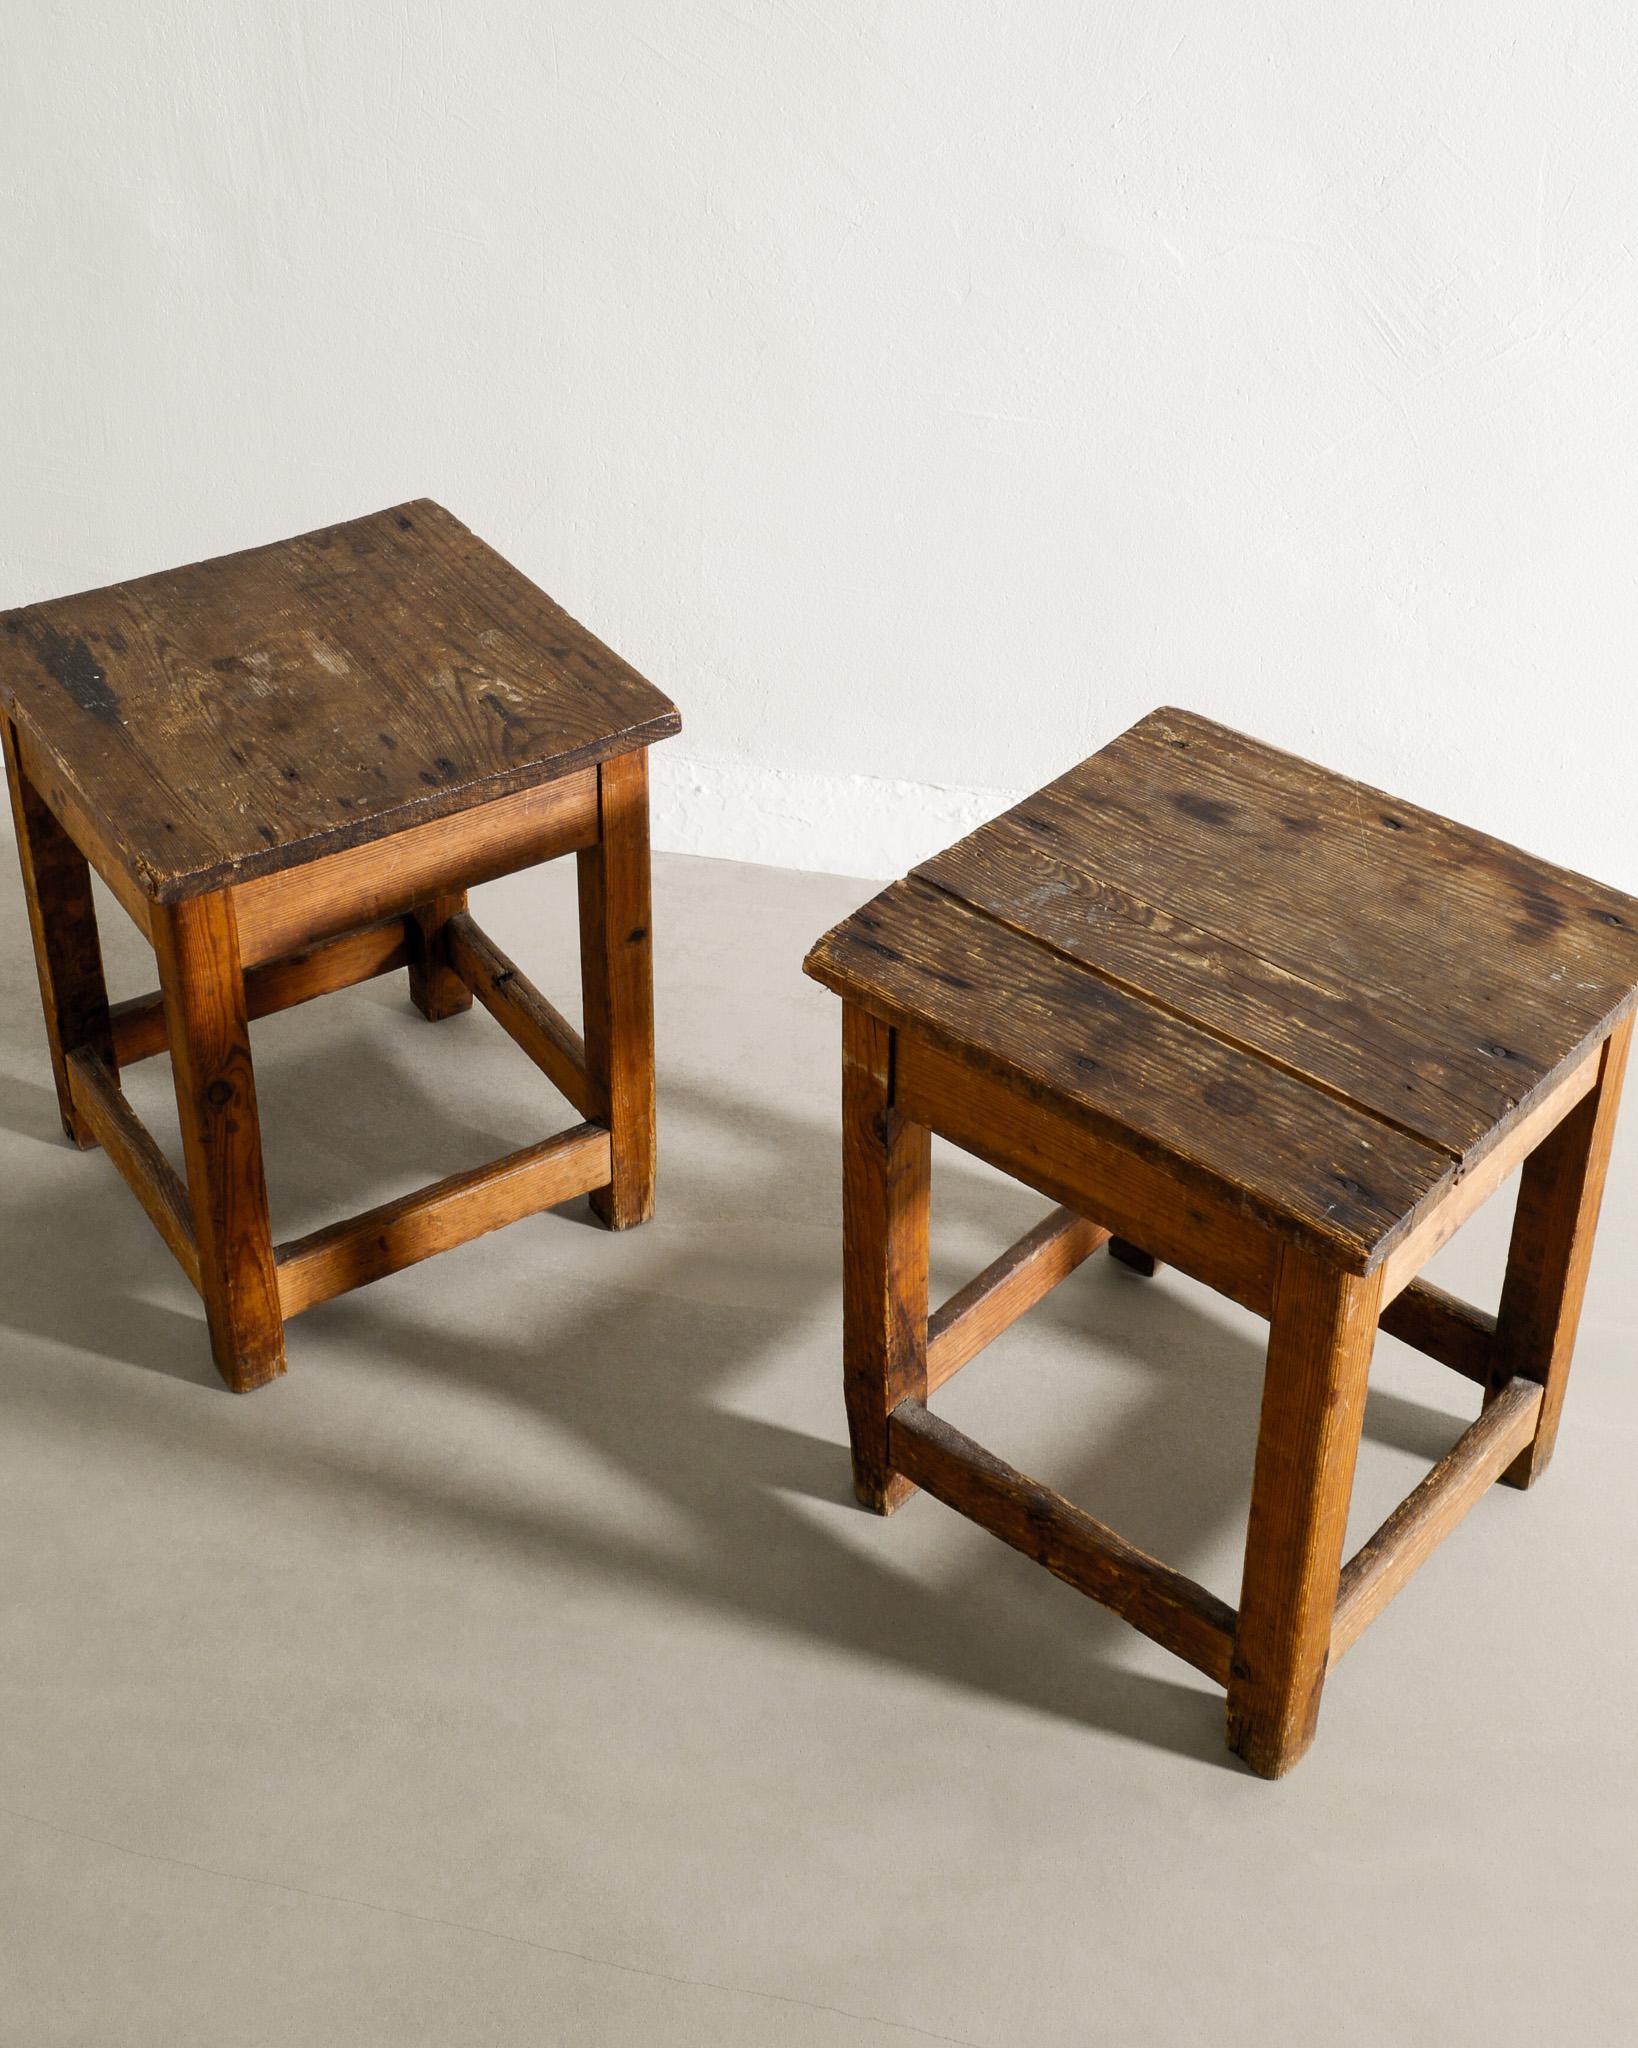 Early 20th Century Pair of Rustic Wooden Swedish Bed Side Tables in Pine Produced Early, 1900s For Sale